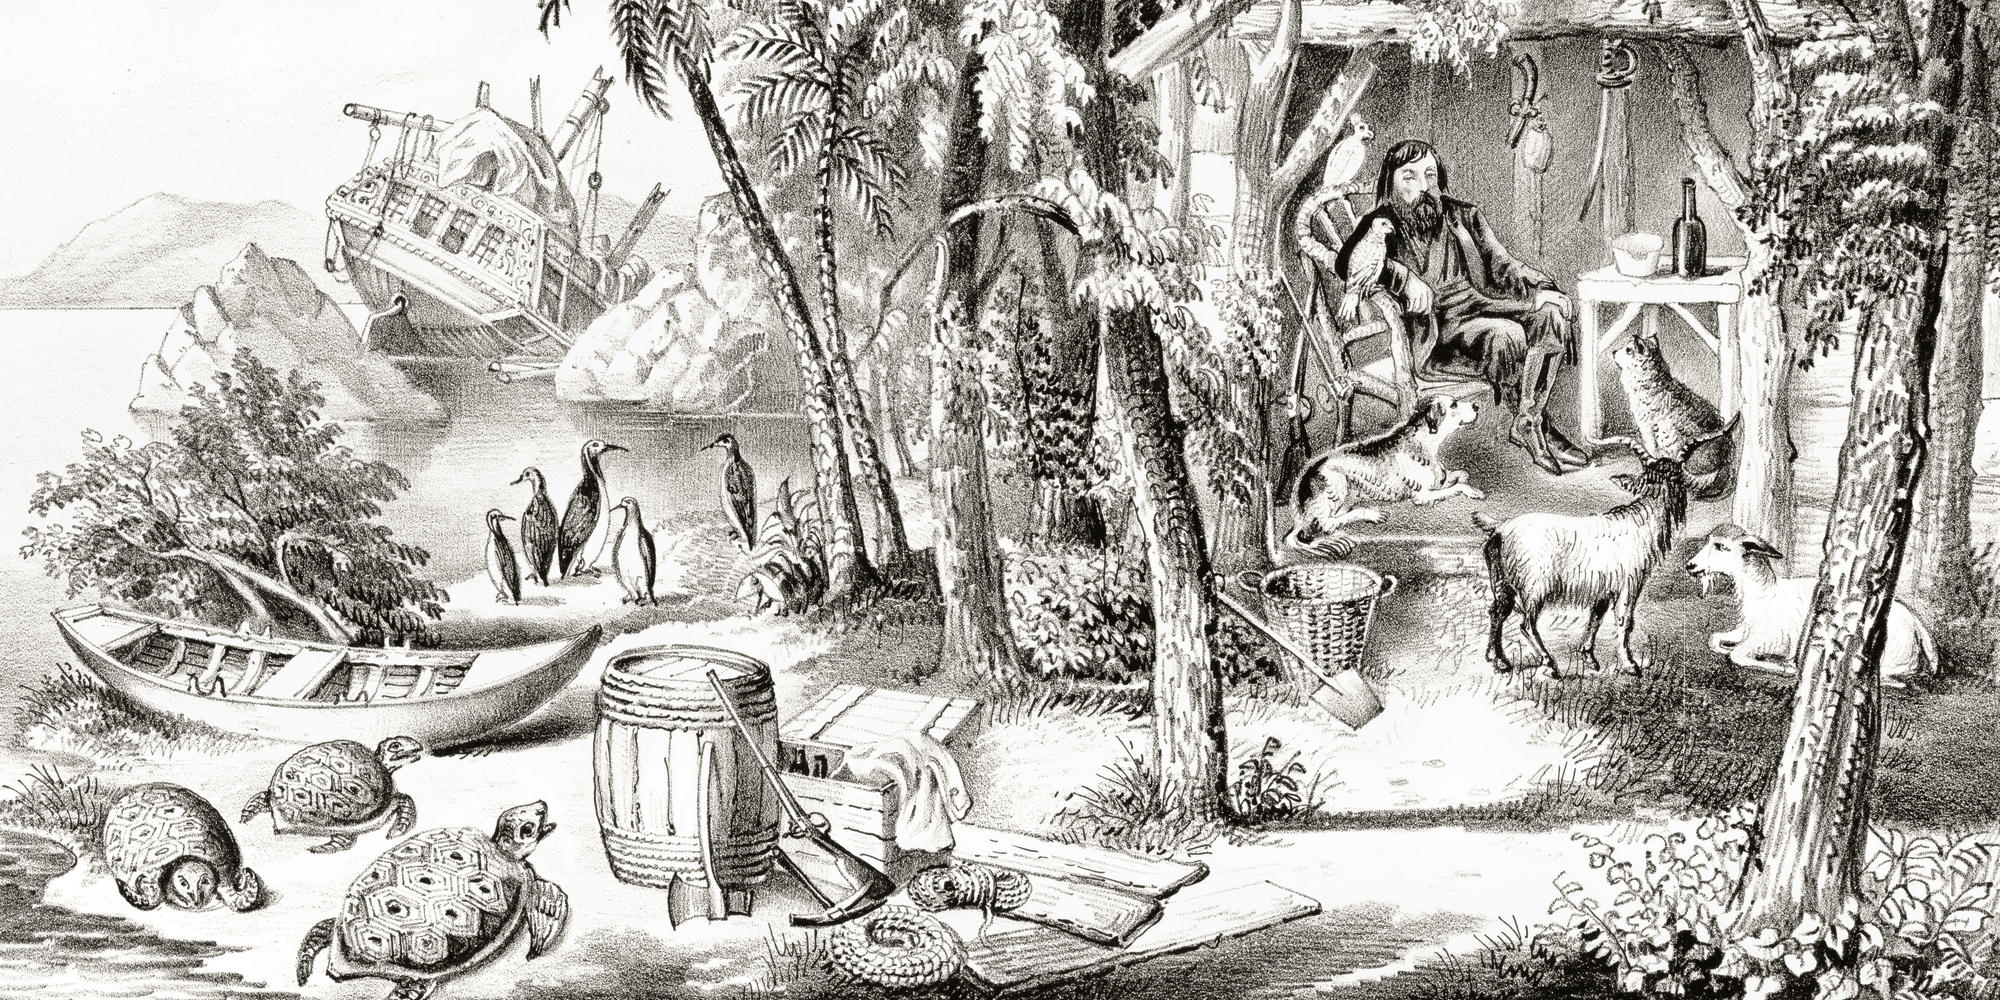 Robinson Crusoe and his pets